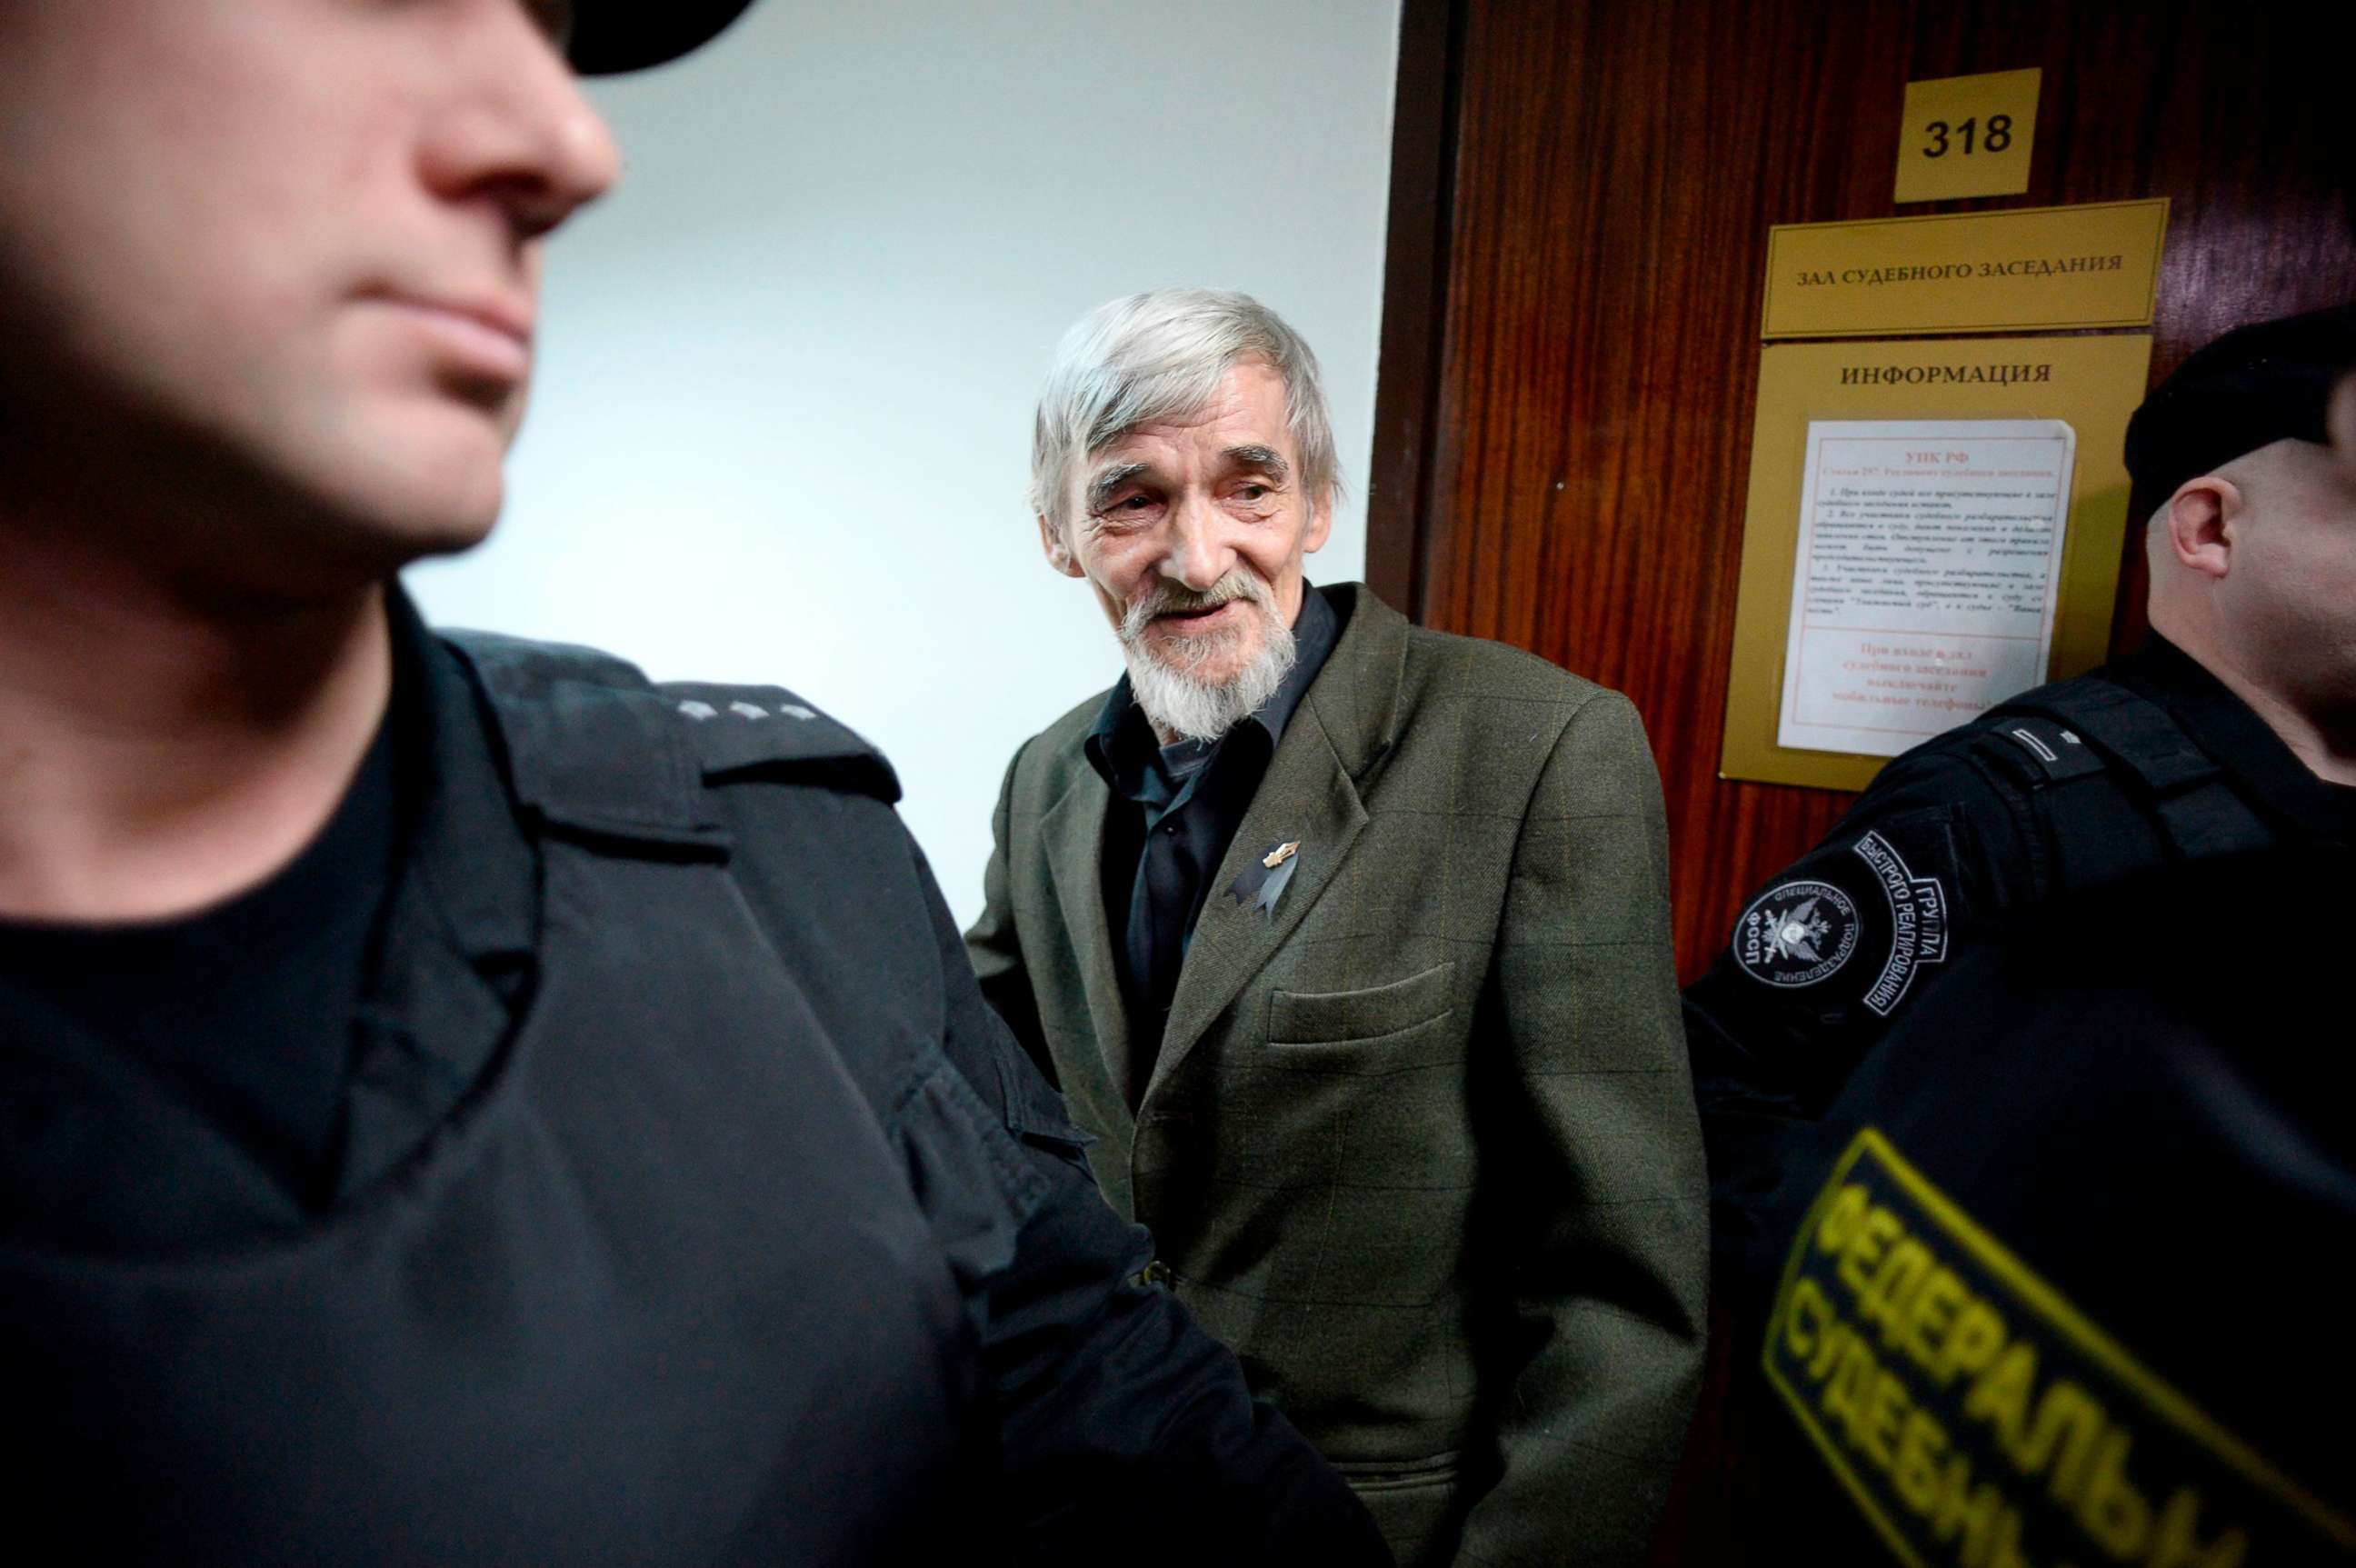 PHOTO: In this file photo taken on April 05, 2018 Russian historian Yury Dmitriyev, who heads rights group Memorial's branch in Karelia, arrives for the verdict in his child pornography trial at a court in the city of Petrozavodsk in northwestern Russia. 